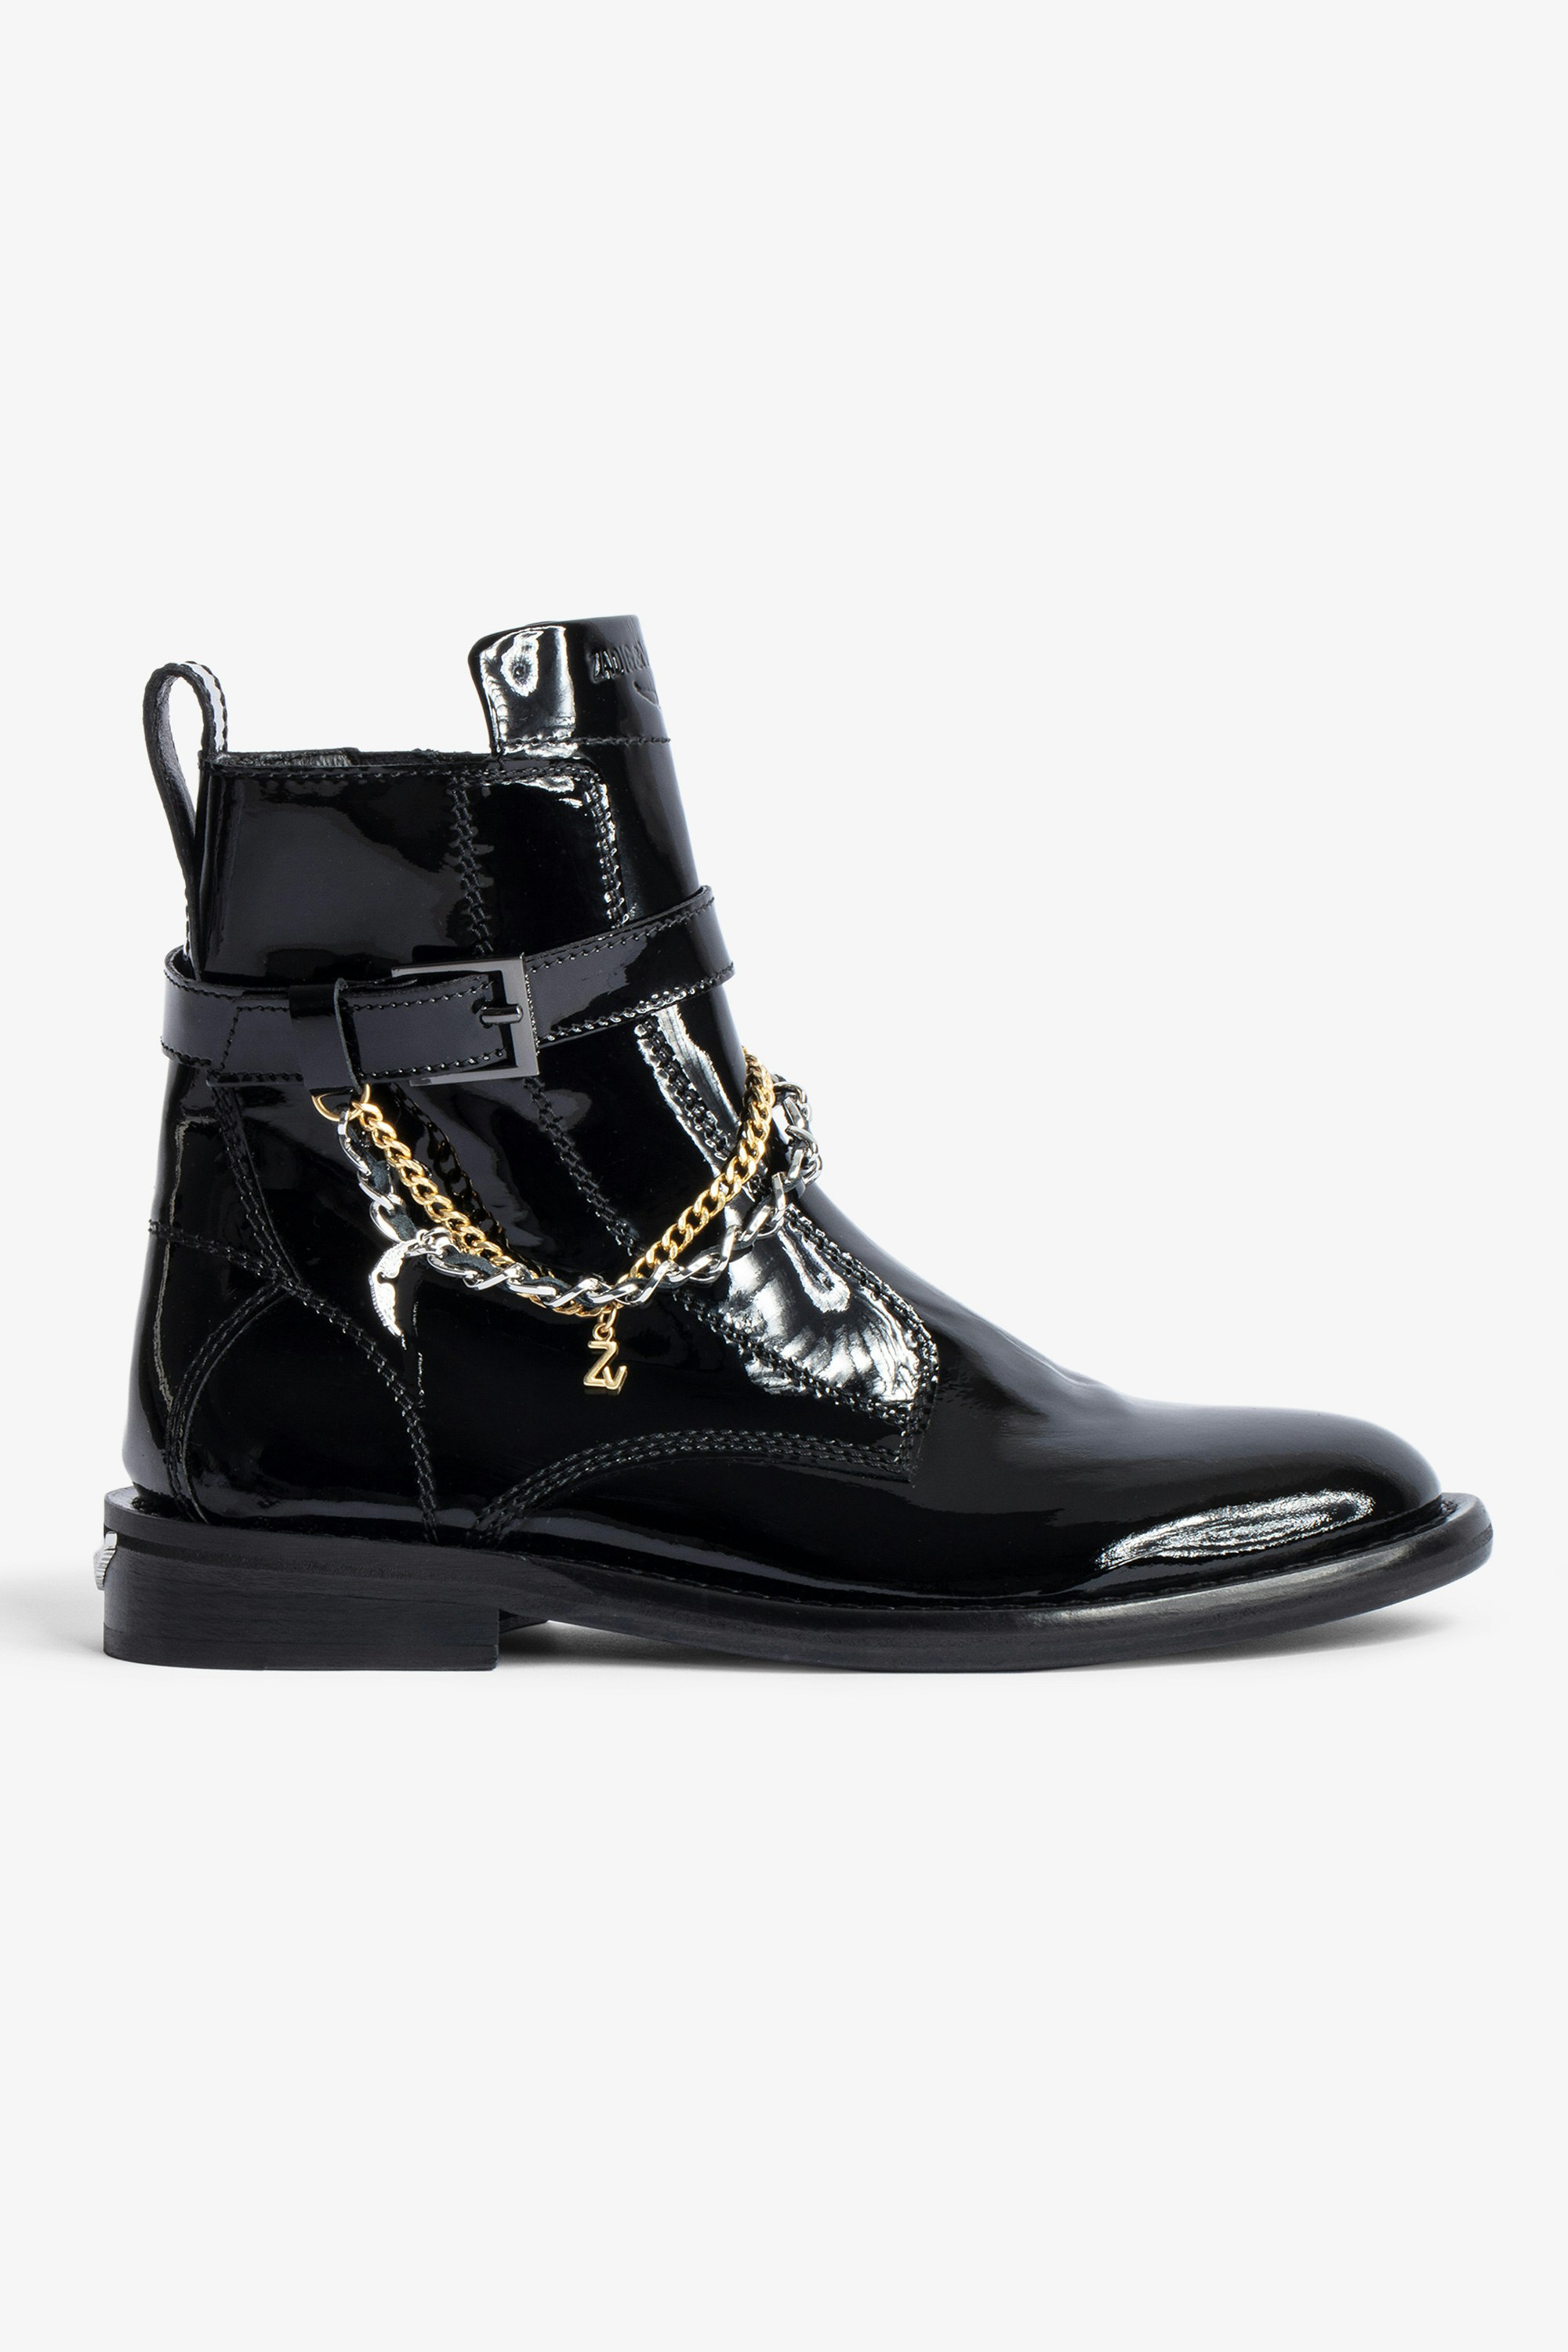 Laureen High Ankle ブーツ Women’s patent black leather ankle boots with strap, double metal and gold-tone chain and charms